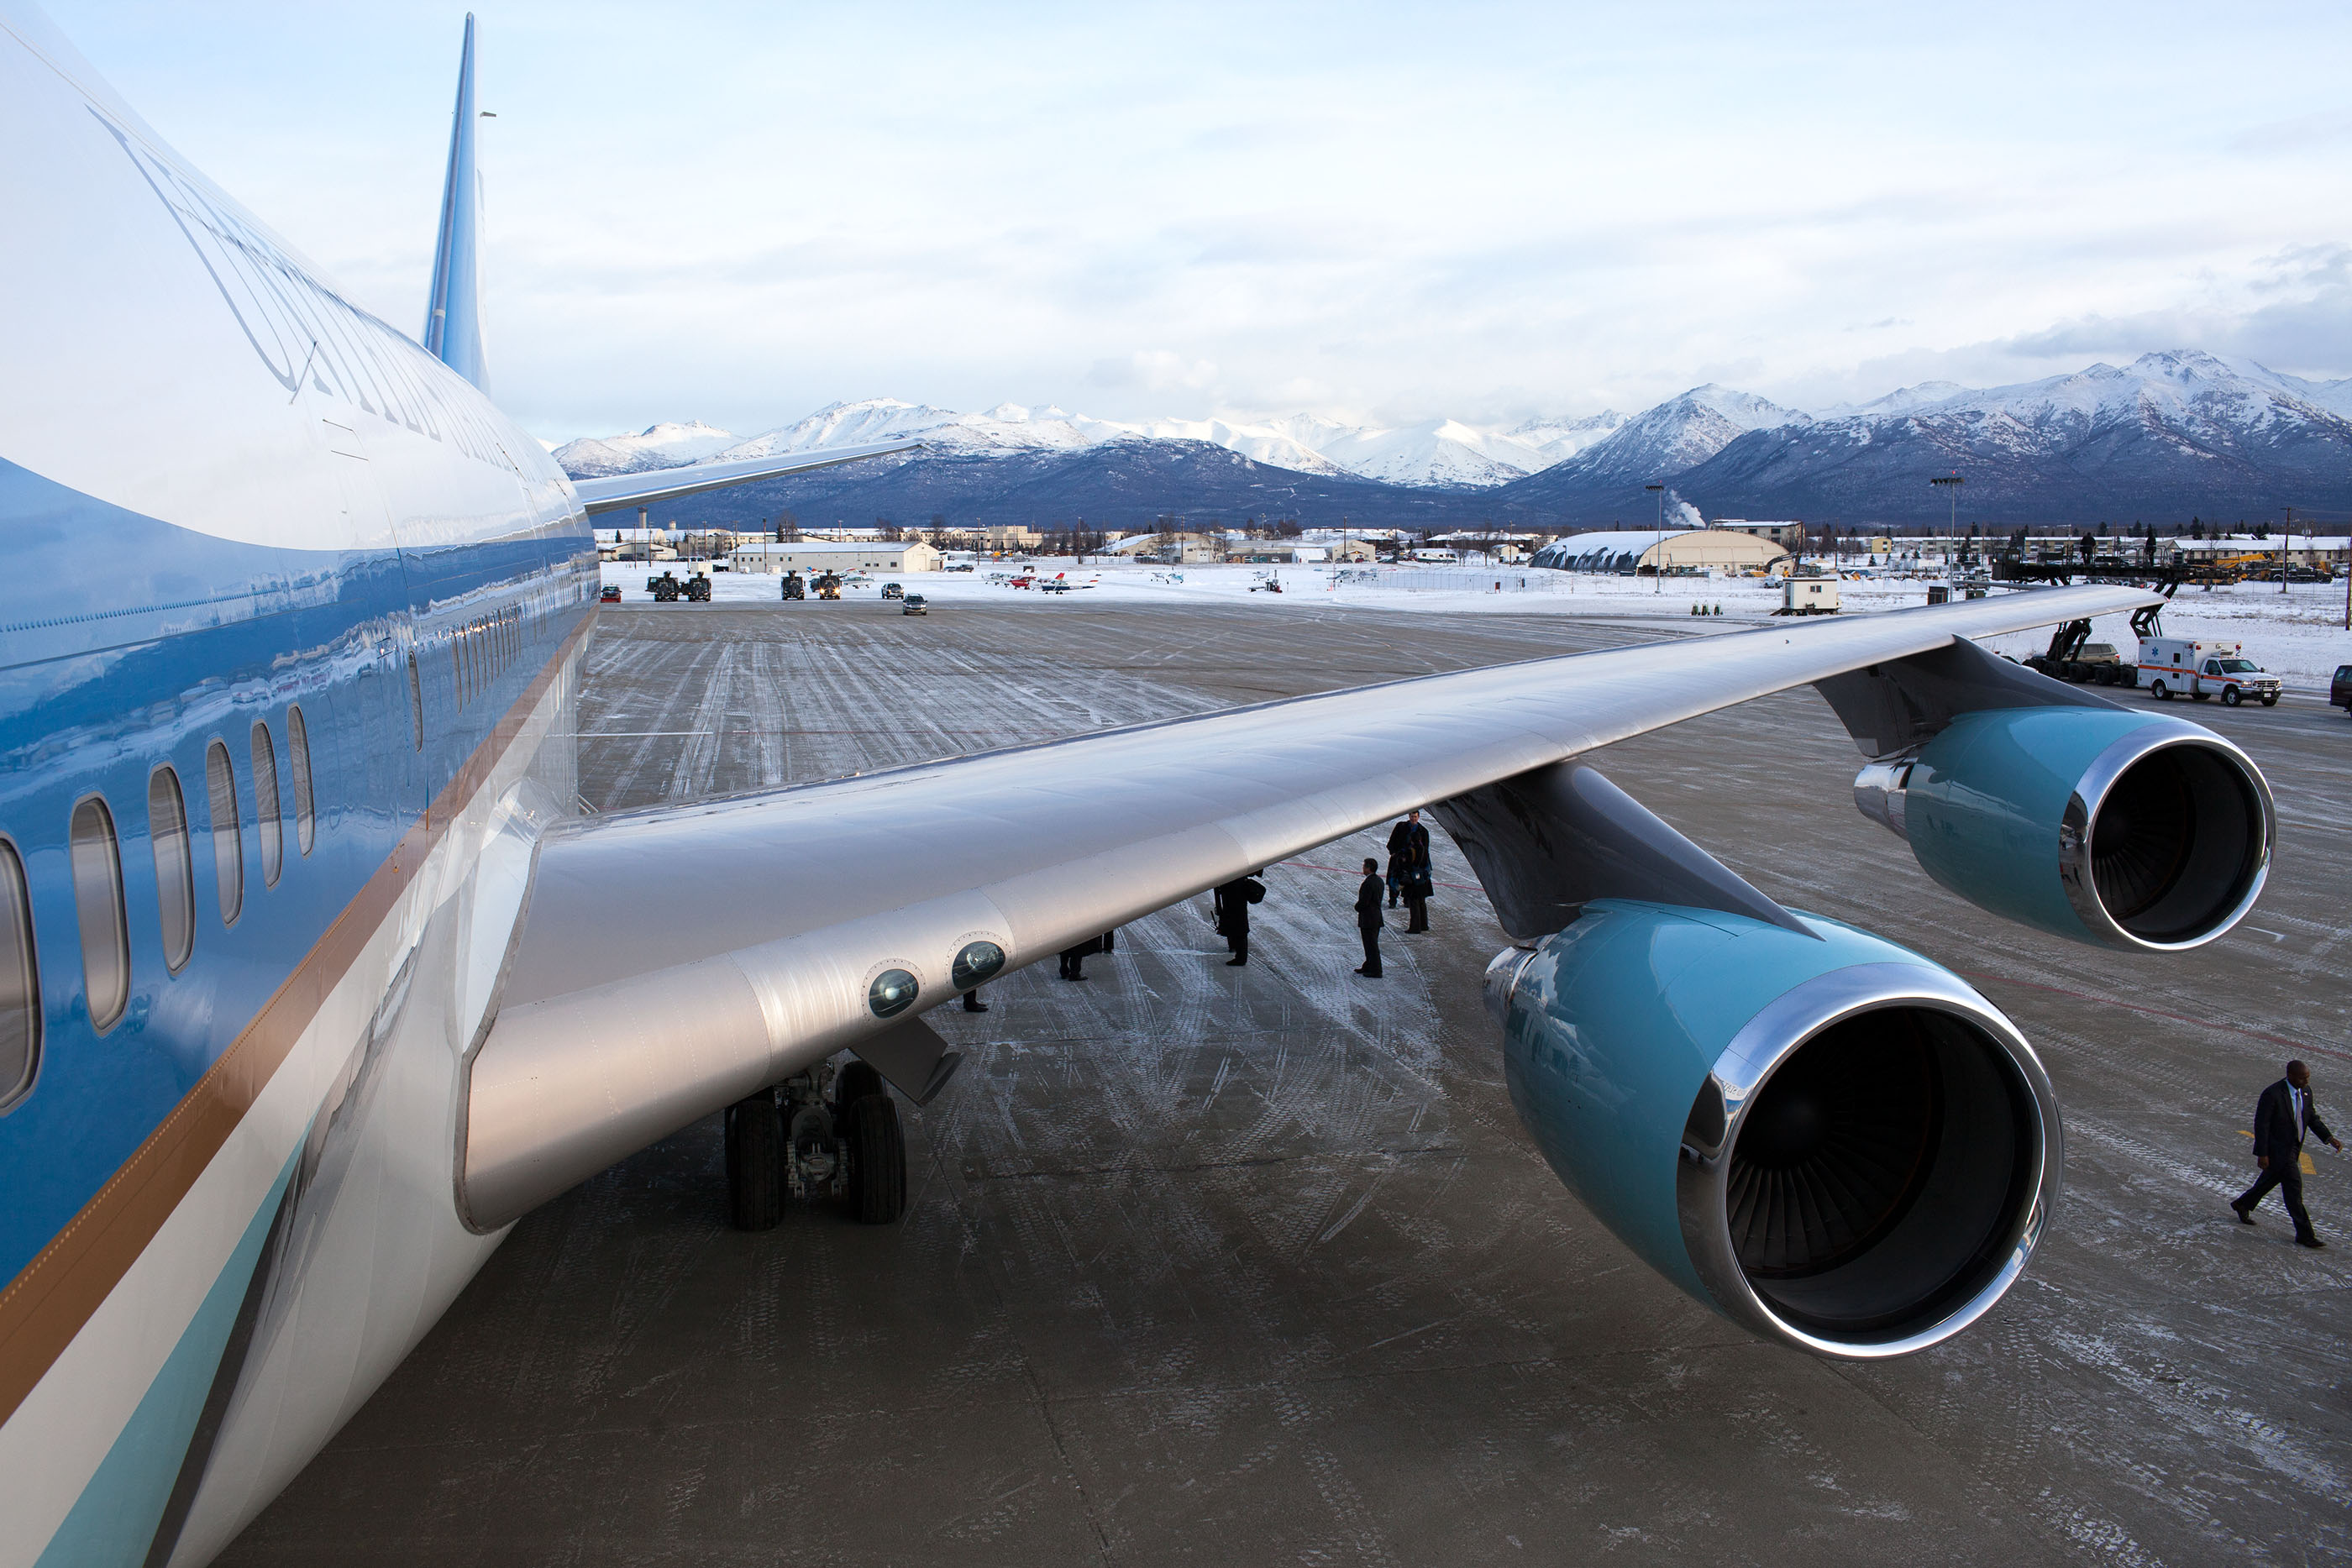 Alaska. Nov 12, 2009. Air Force One refueling at Elmendorf Air Force Base. (Official White House photo by Pete Souza)